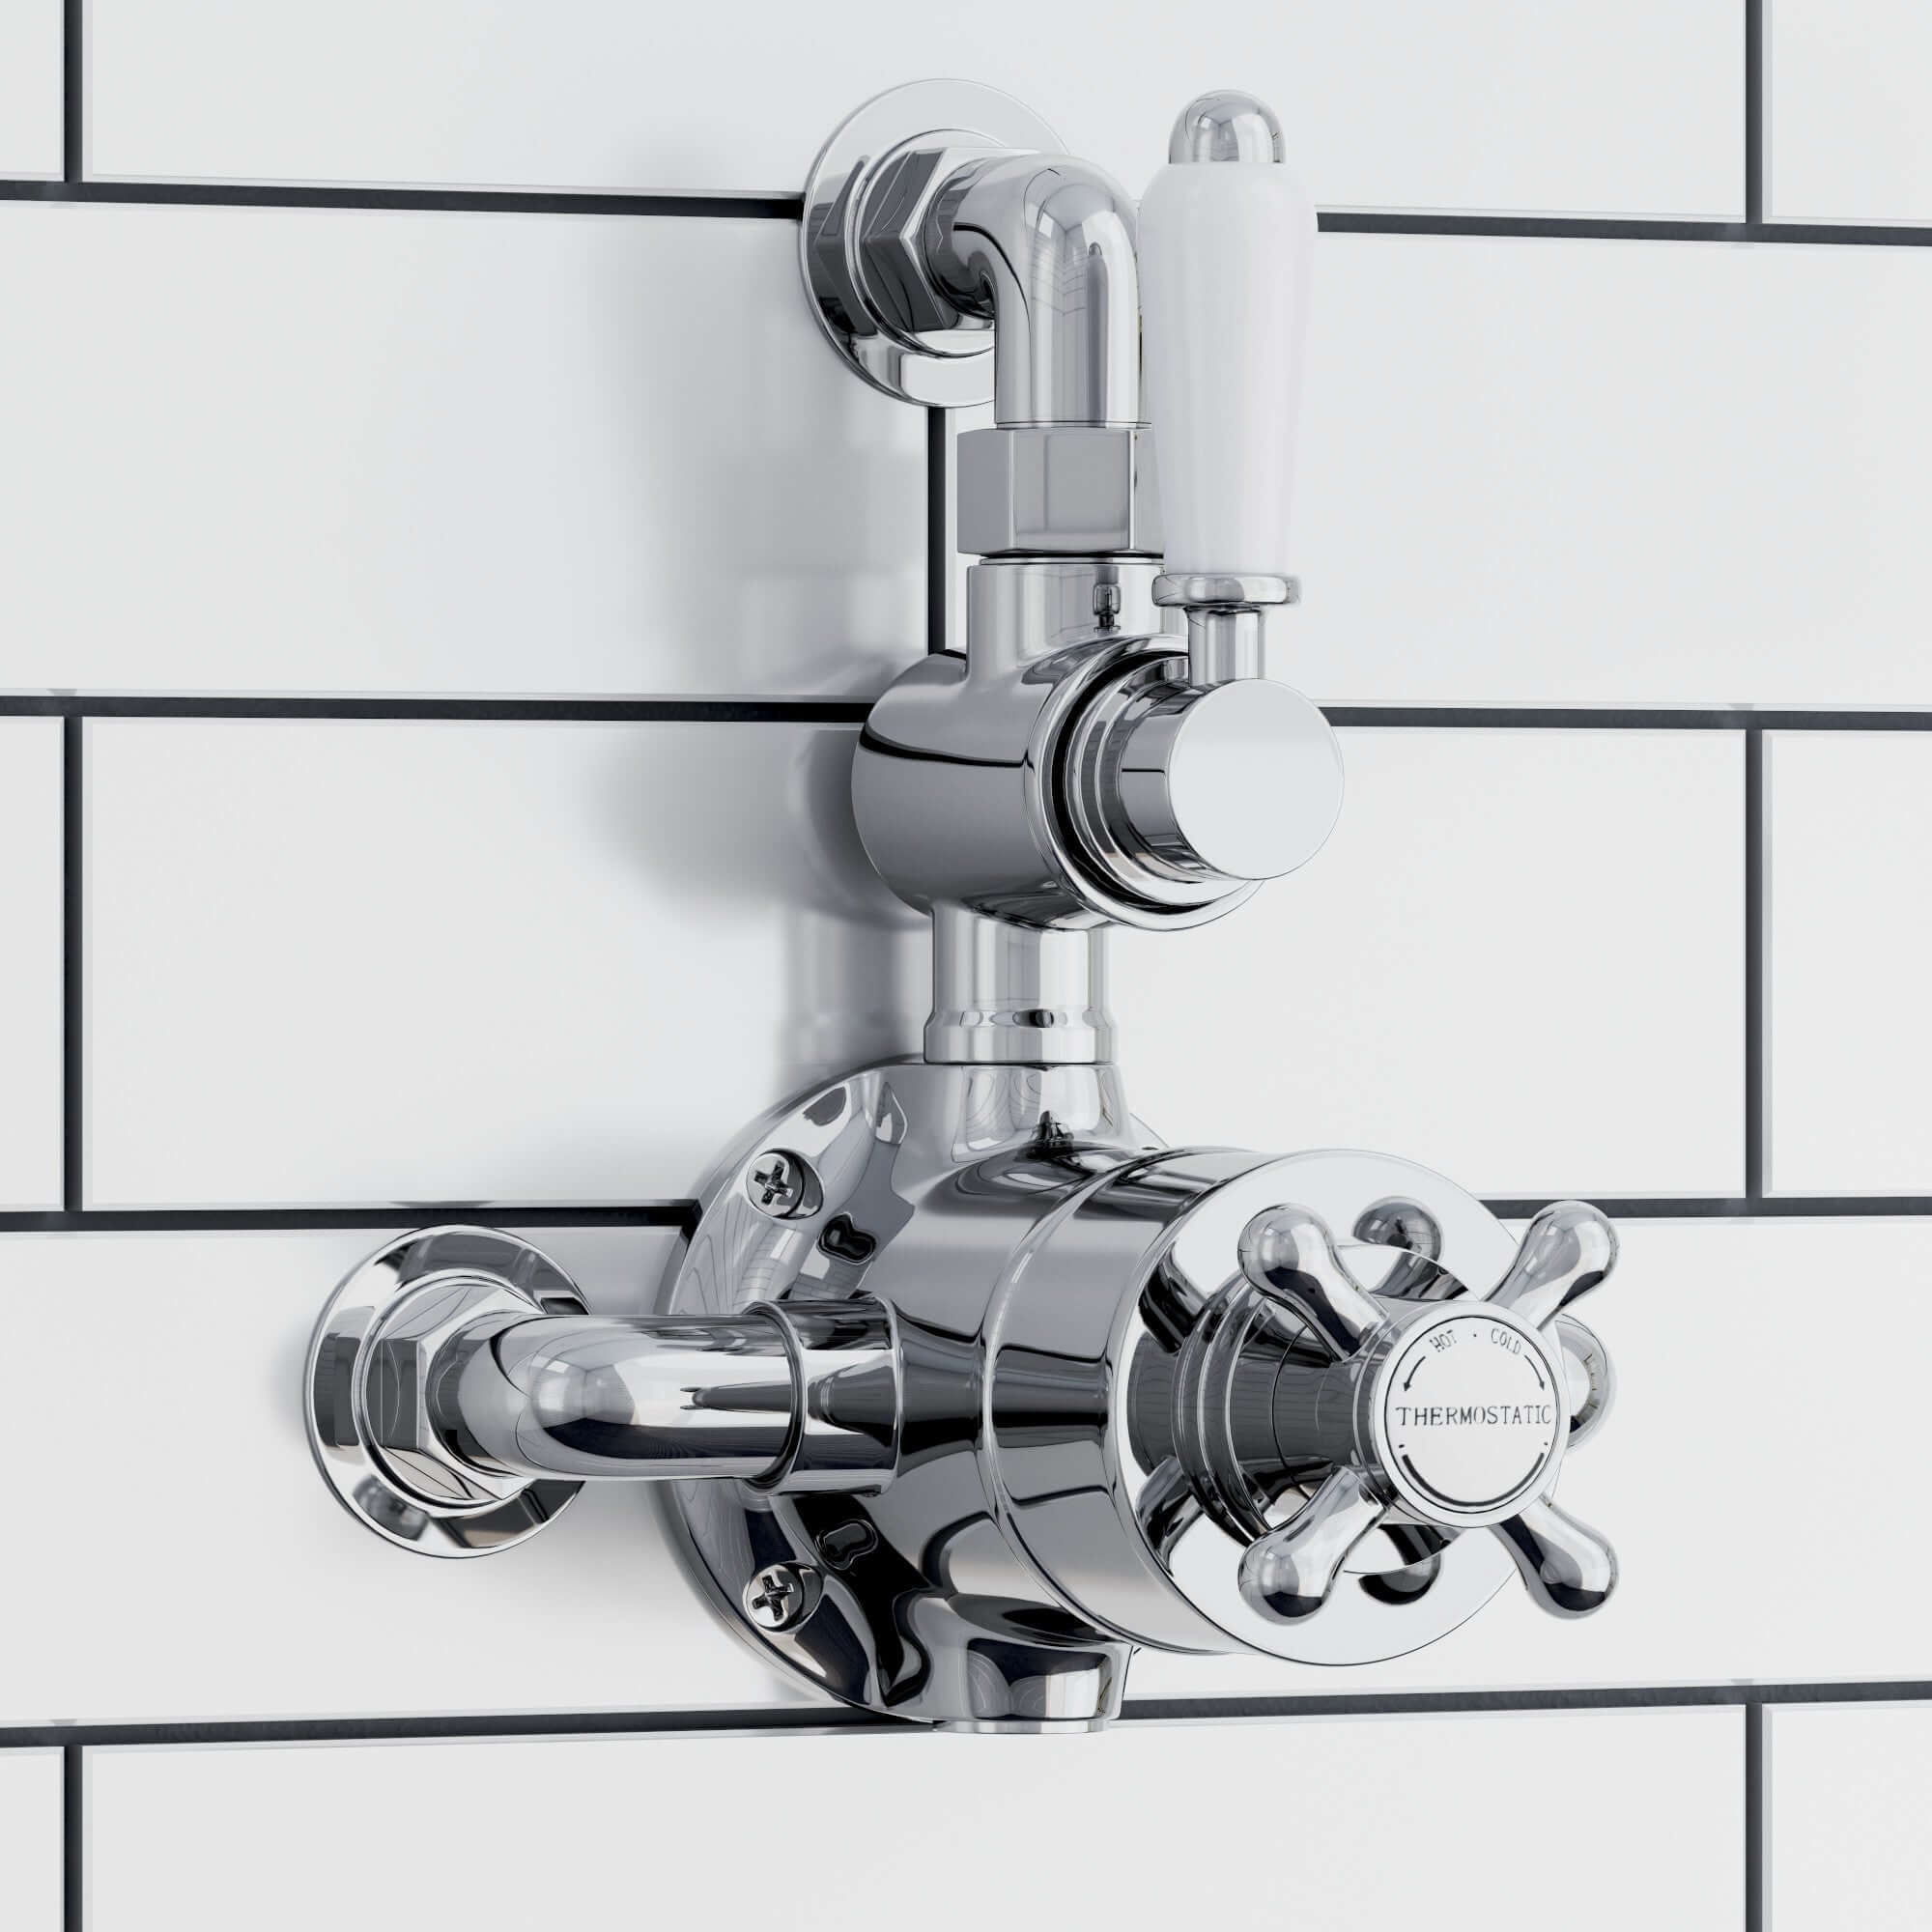 Downton Traditional Twin Thermostatic Shower Valve Exposed With Top Return To Wall Bend - Chrome With White Levers